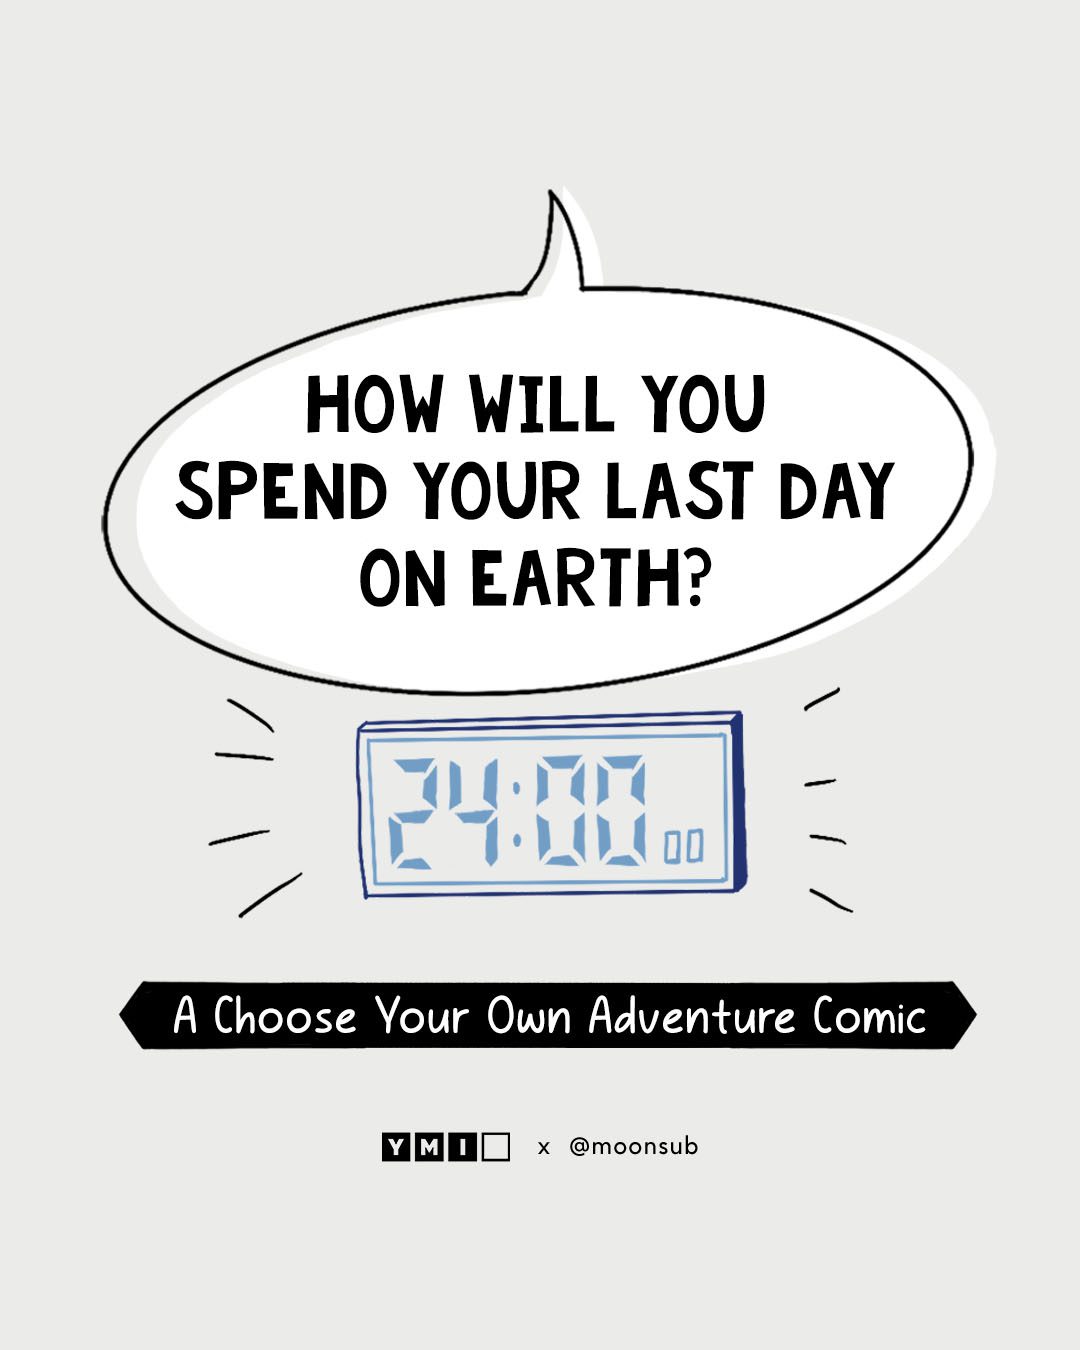 How will you spend your last day on earth?